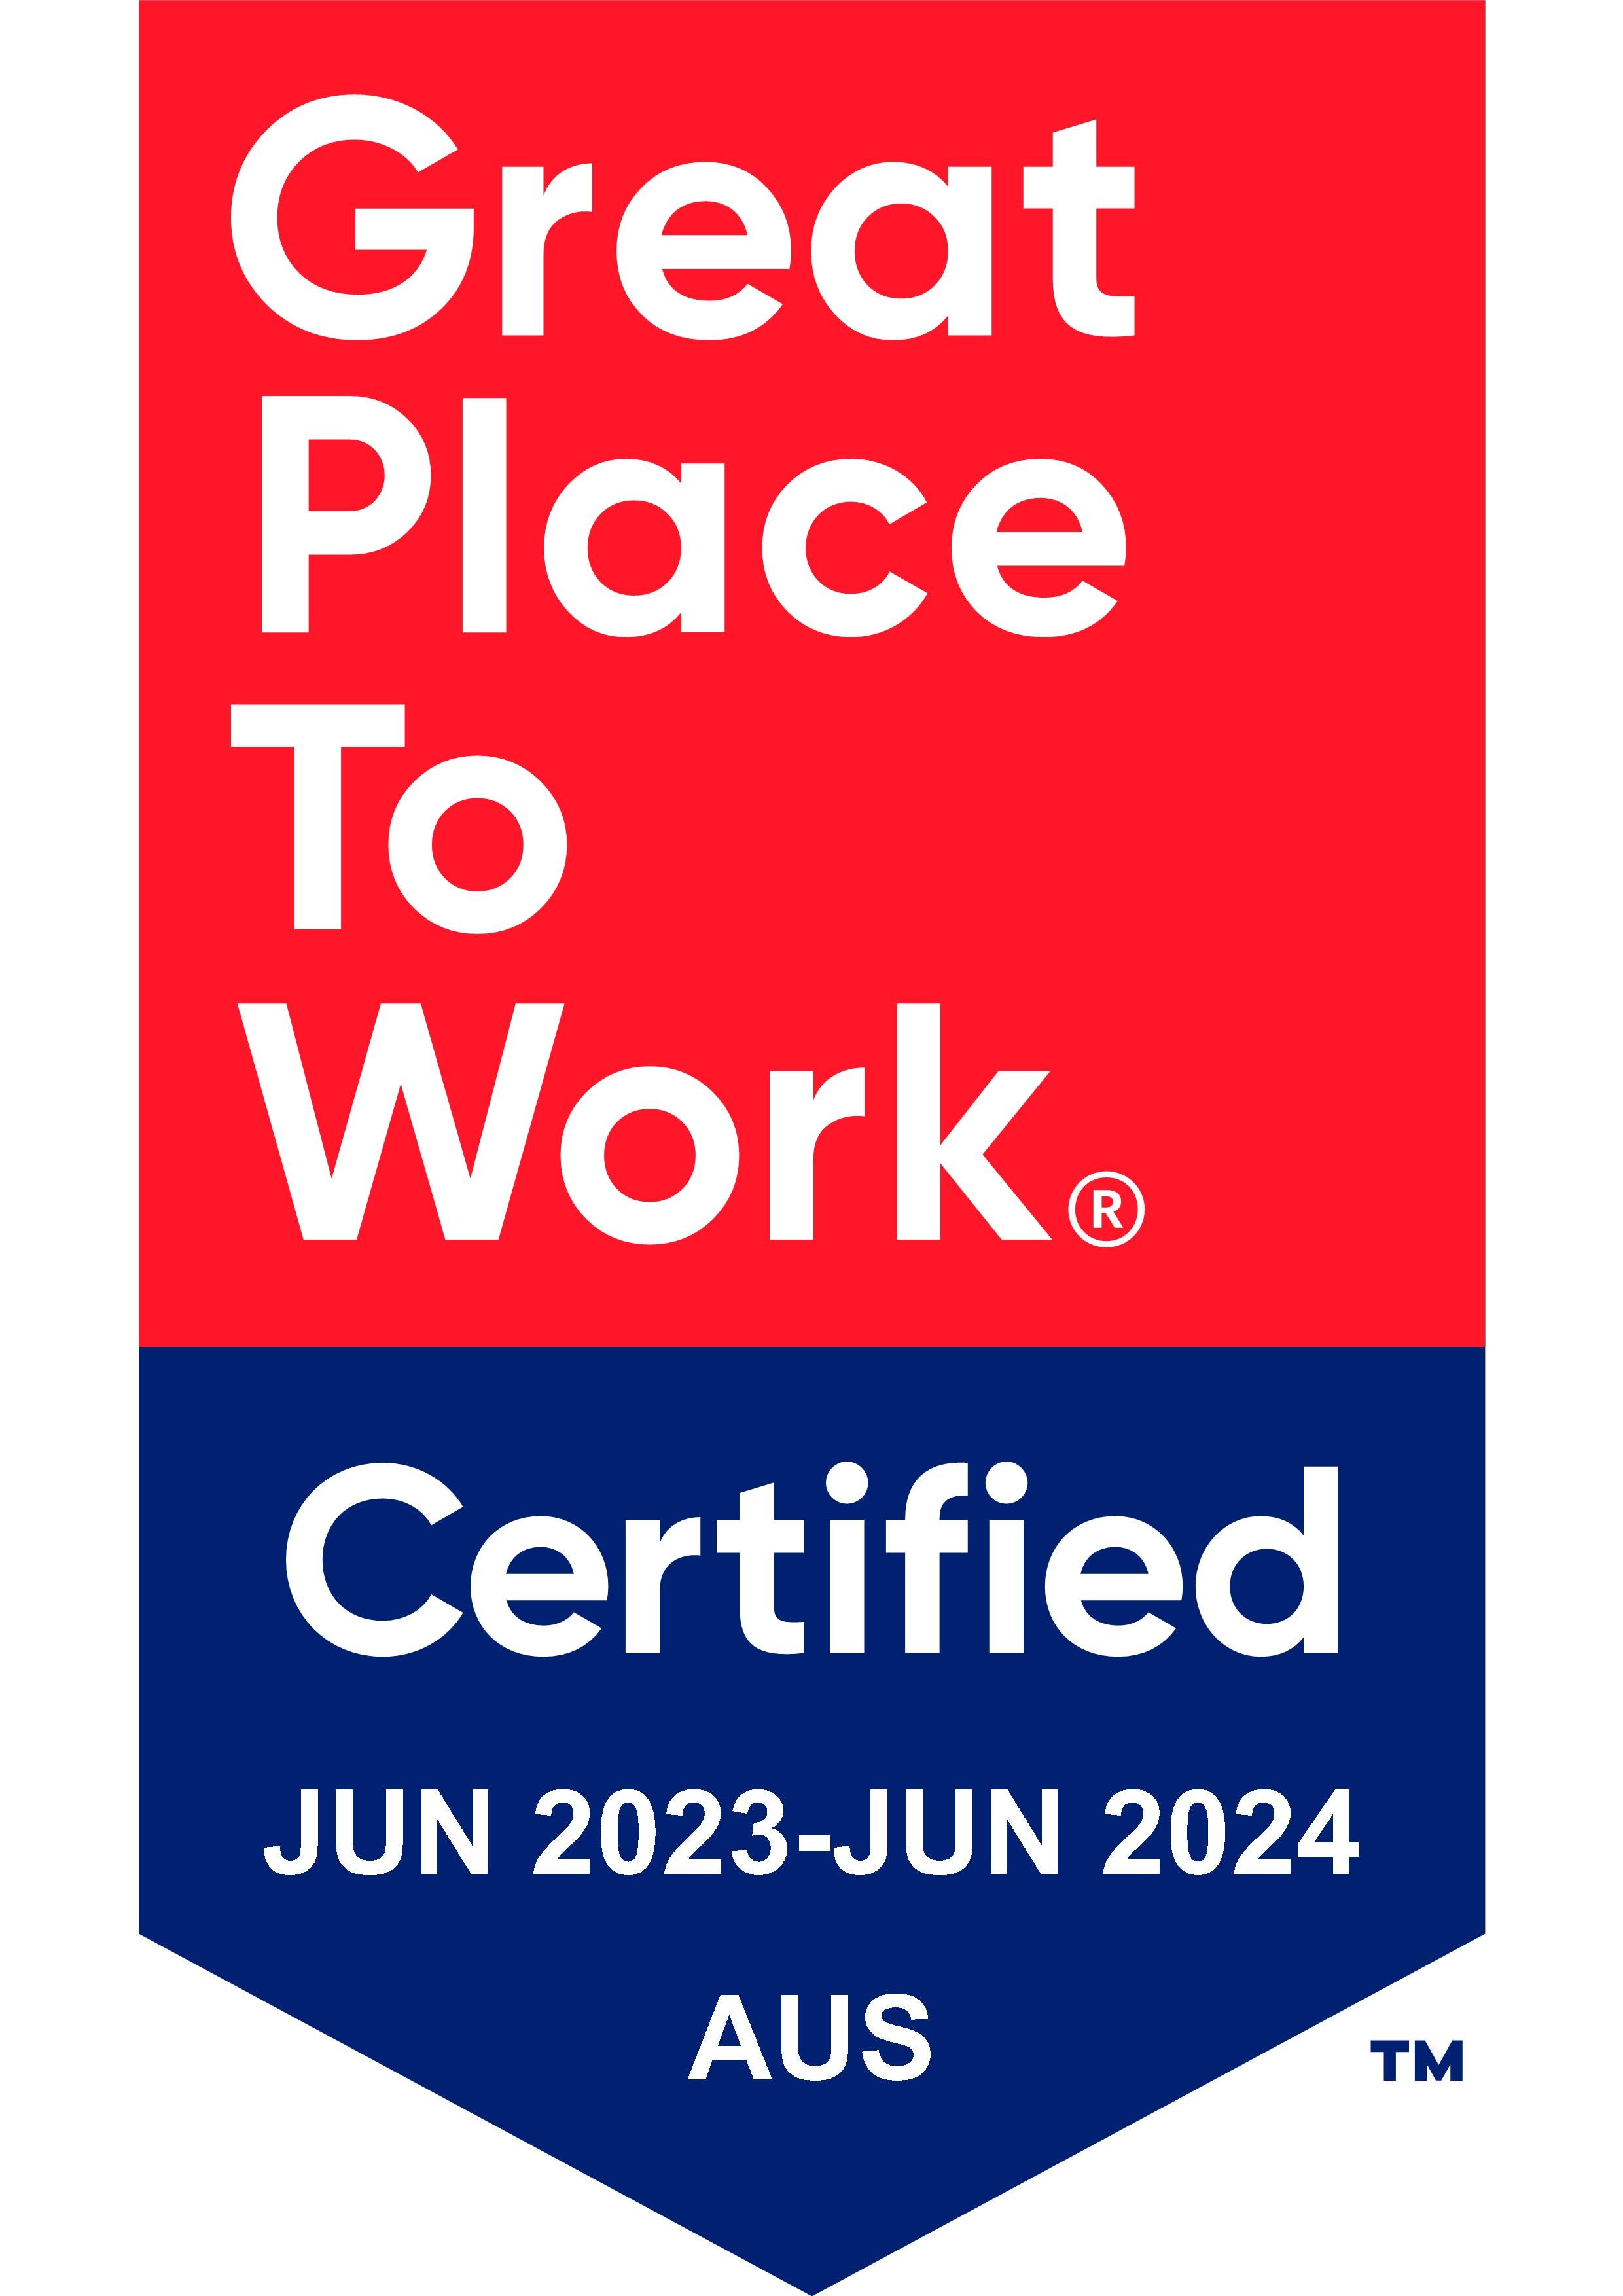 Great Place To Work logo